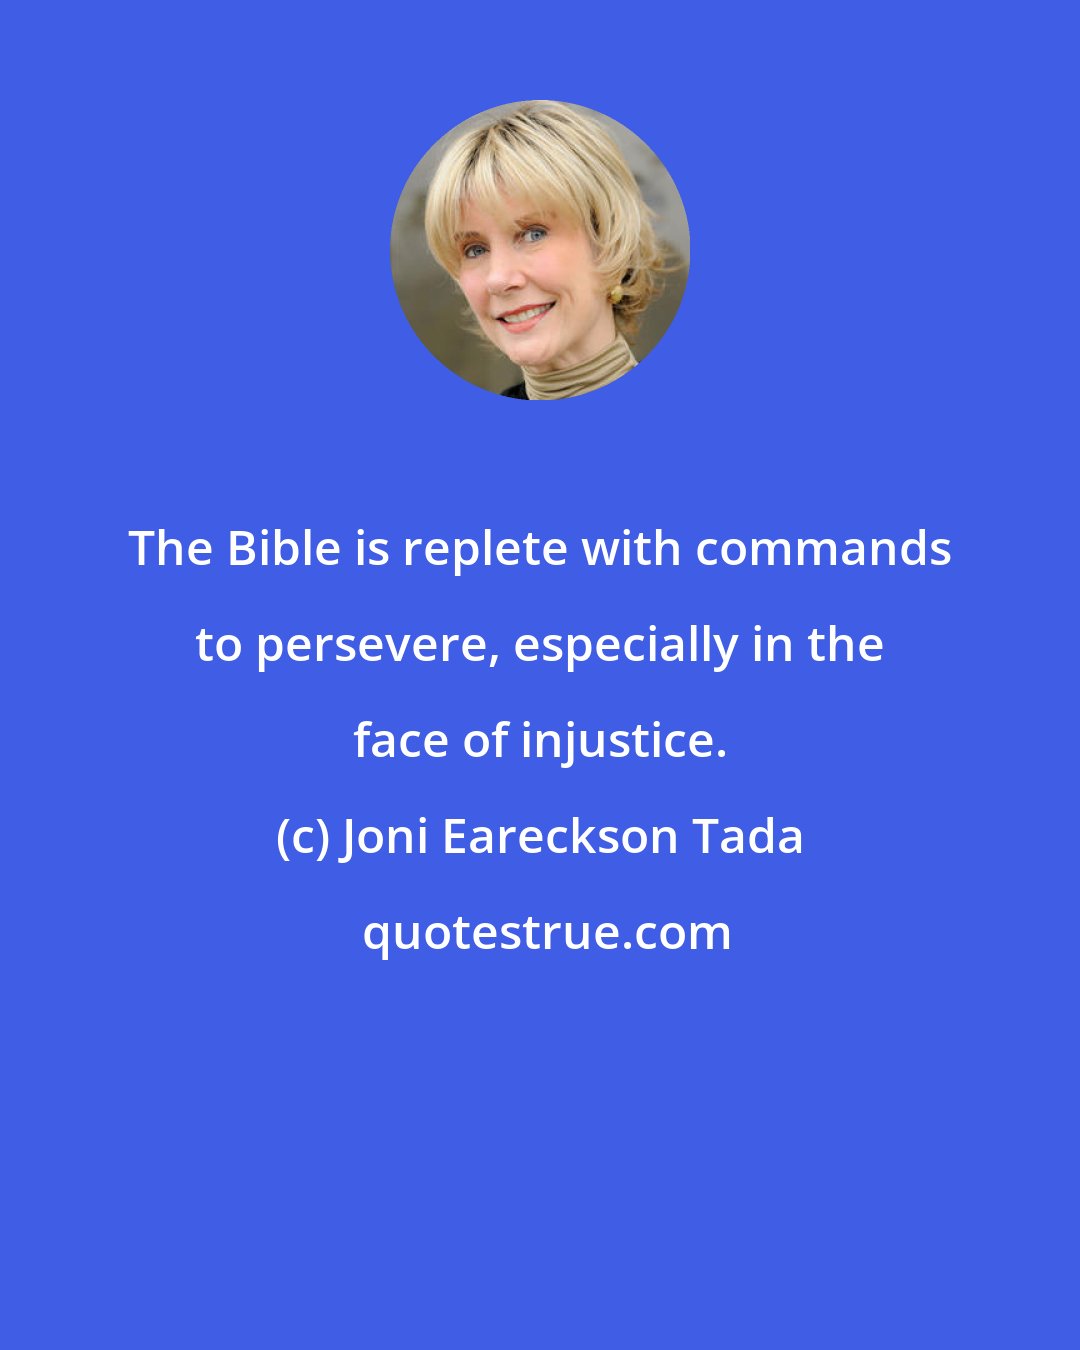 Joni Eareckson Tada: The Bible is replete with commands to persevere, especially in the face of injustice.